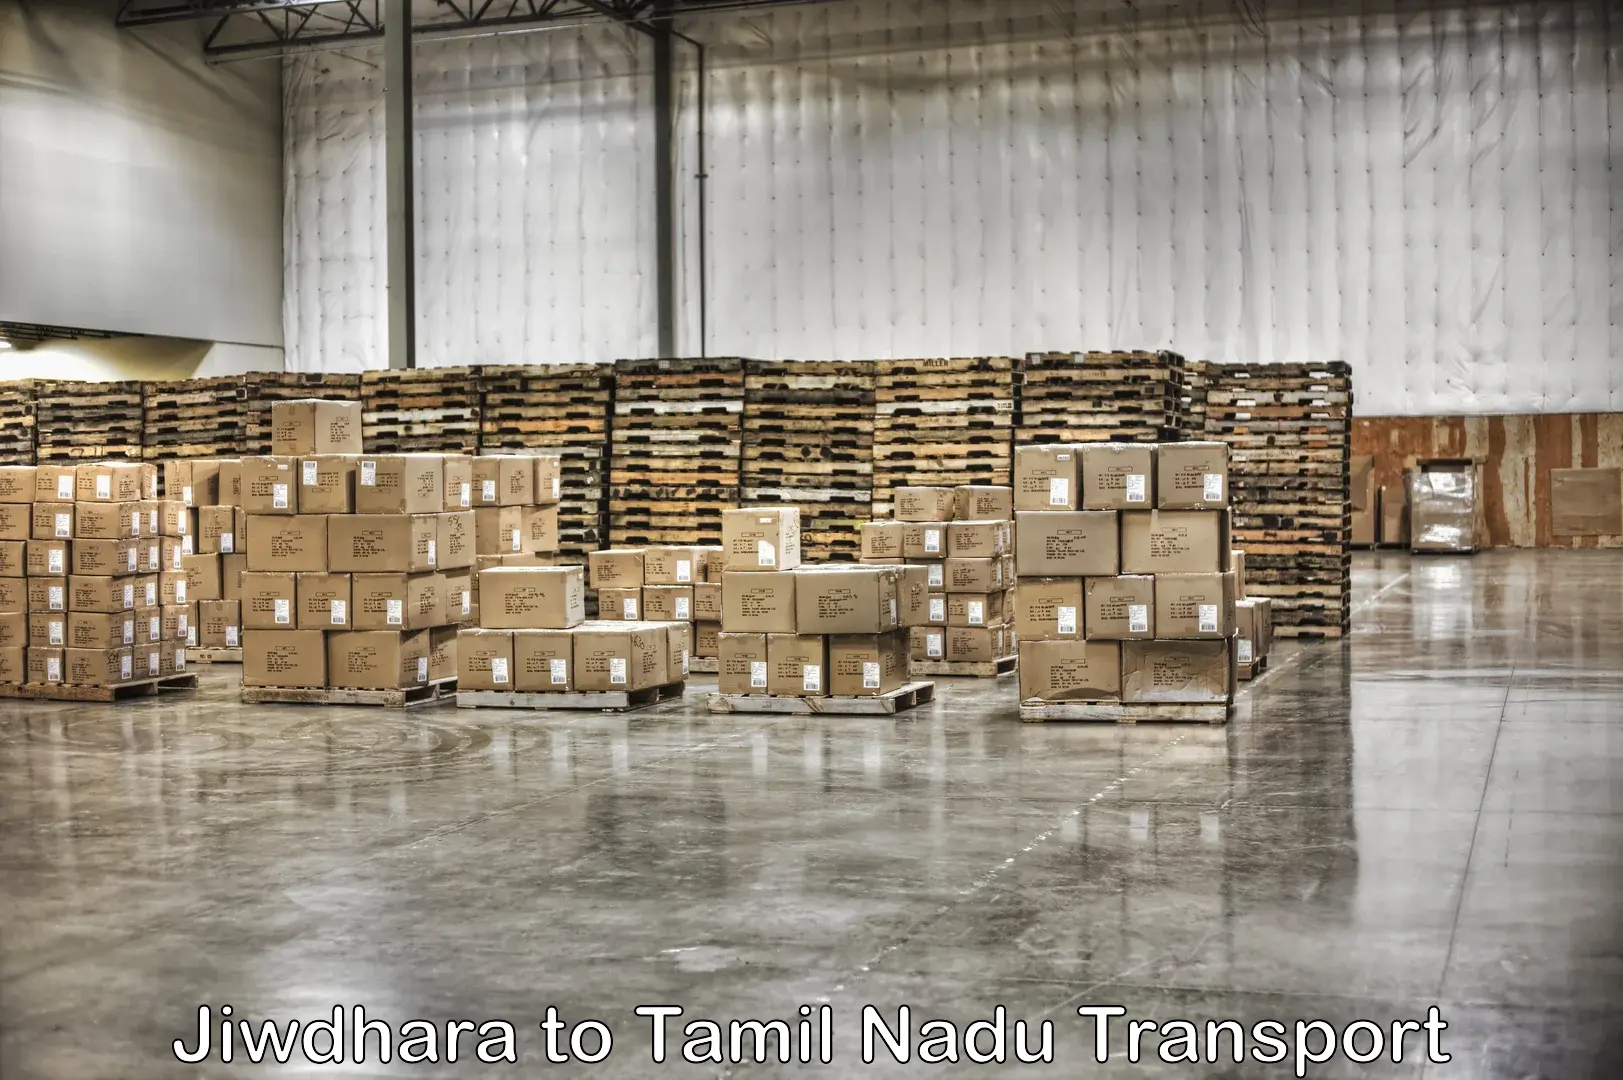 Interstate transport services Jiwdhara to SRM Institute of Science and Technology Chennai